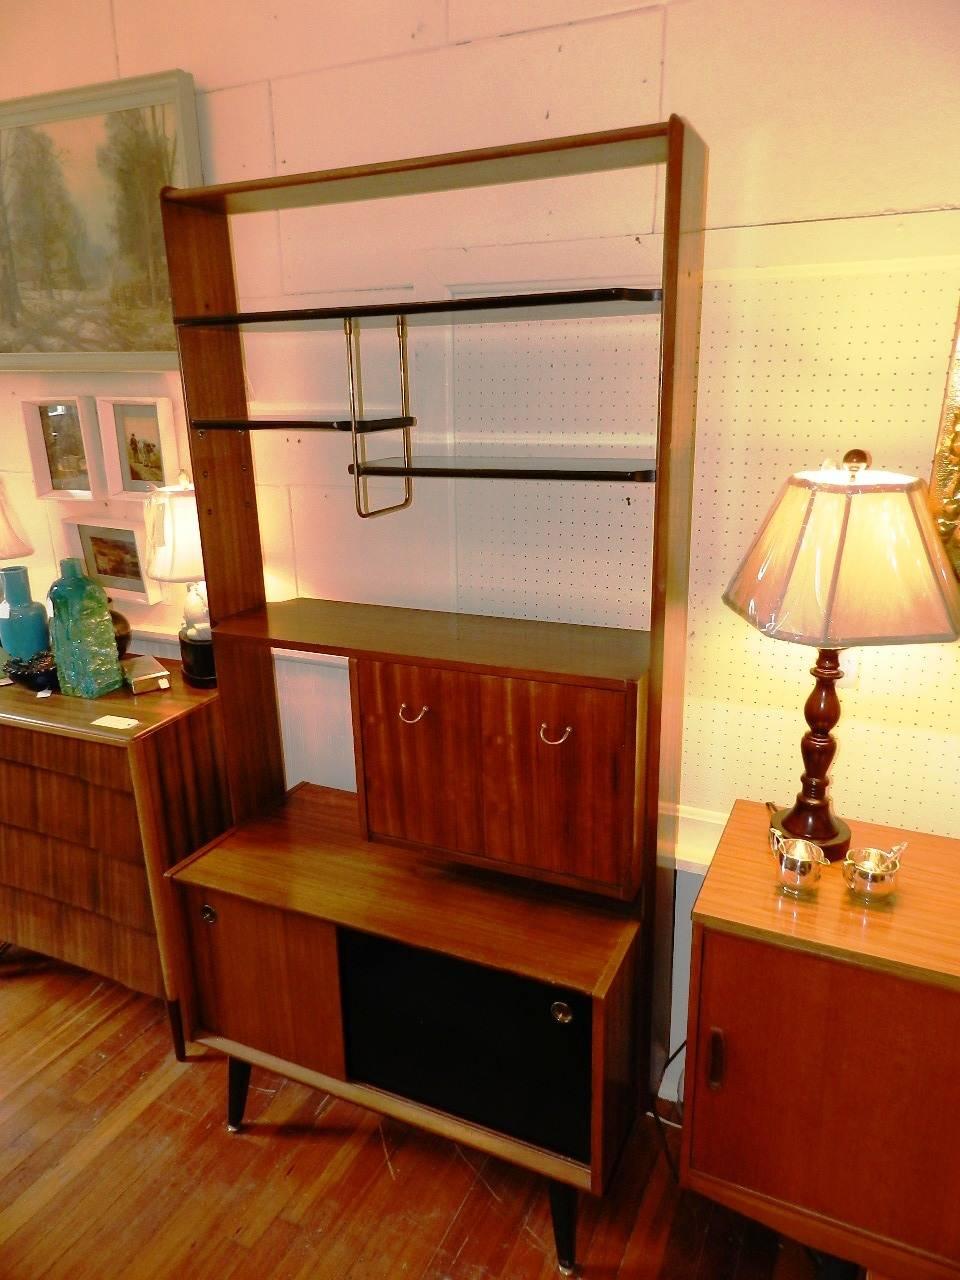 1970s teak display shelves and room divider with finished back and fall front desk with sliding cupboard doors below. The upper display shelves are adjustable.